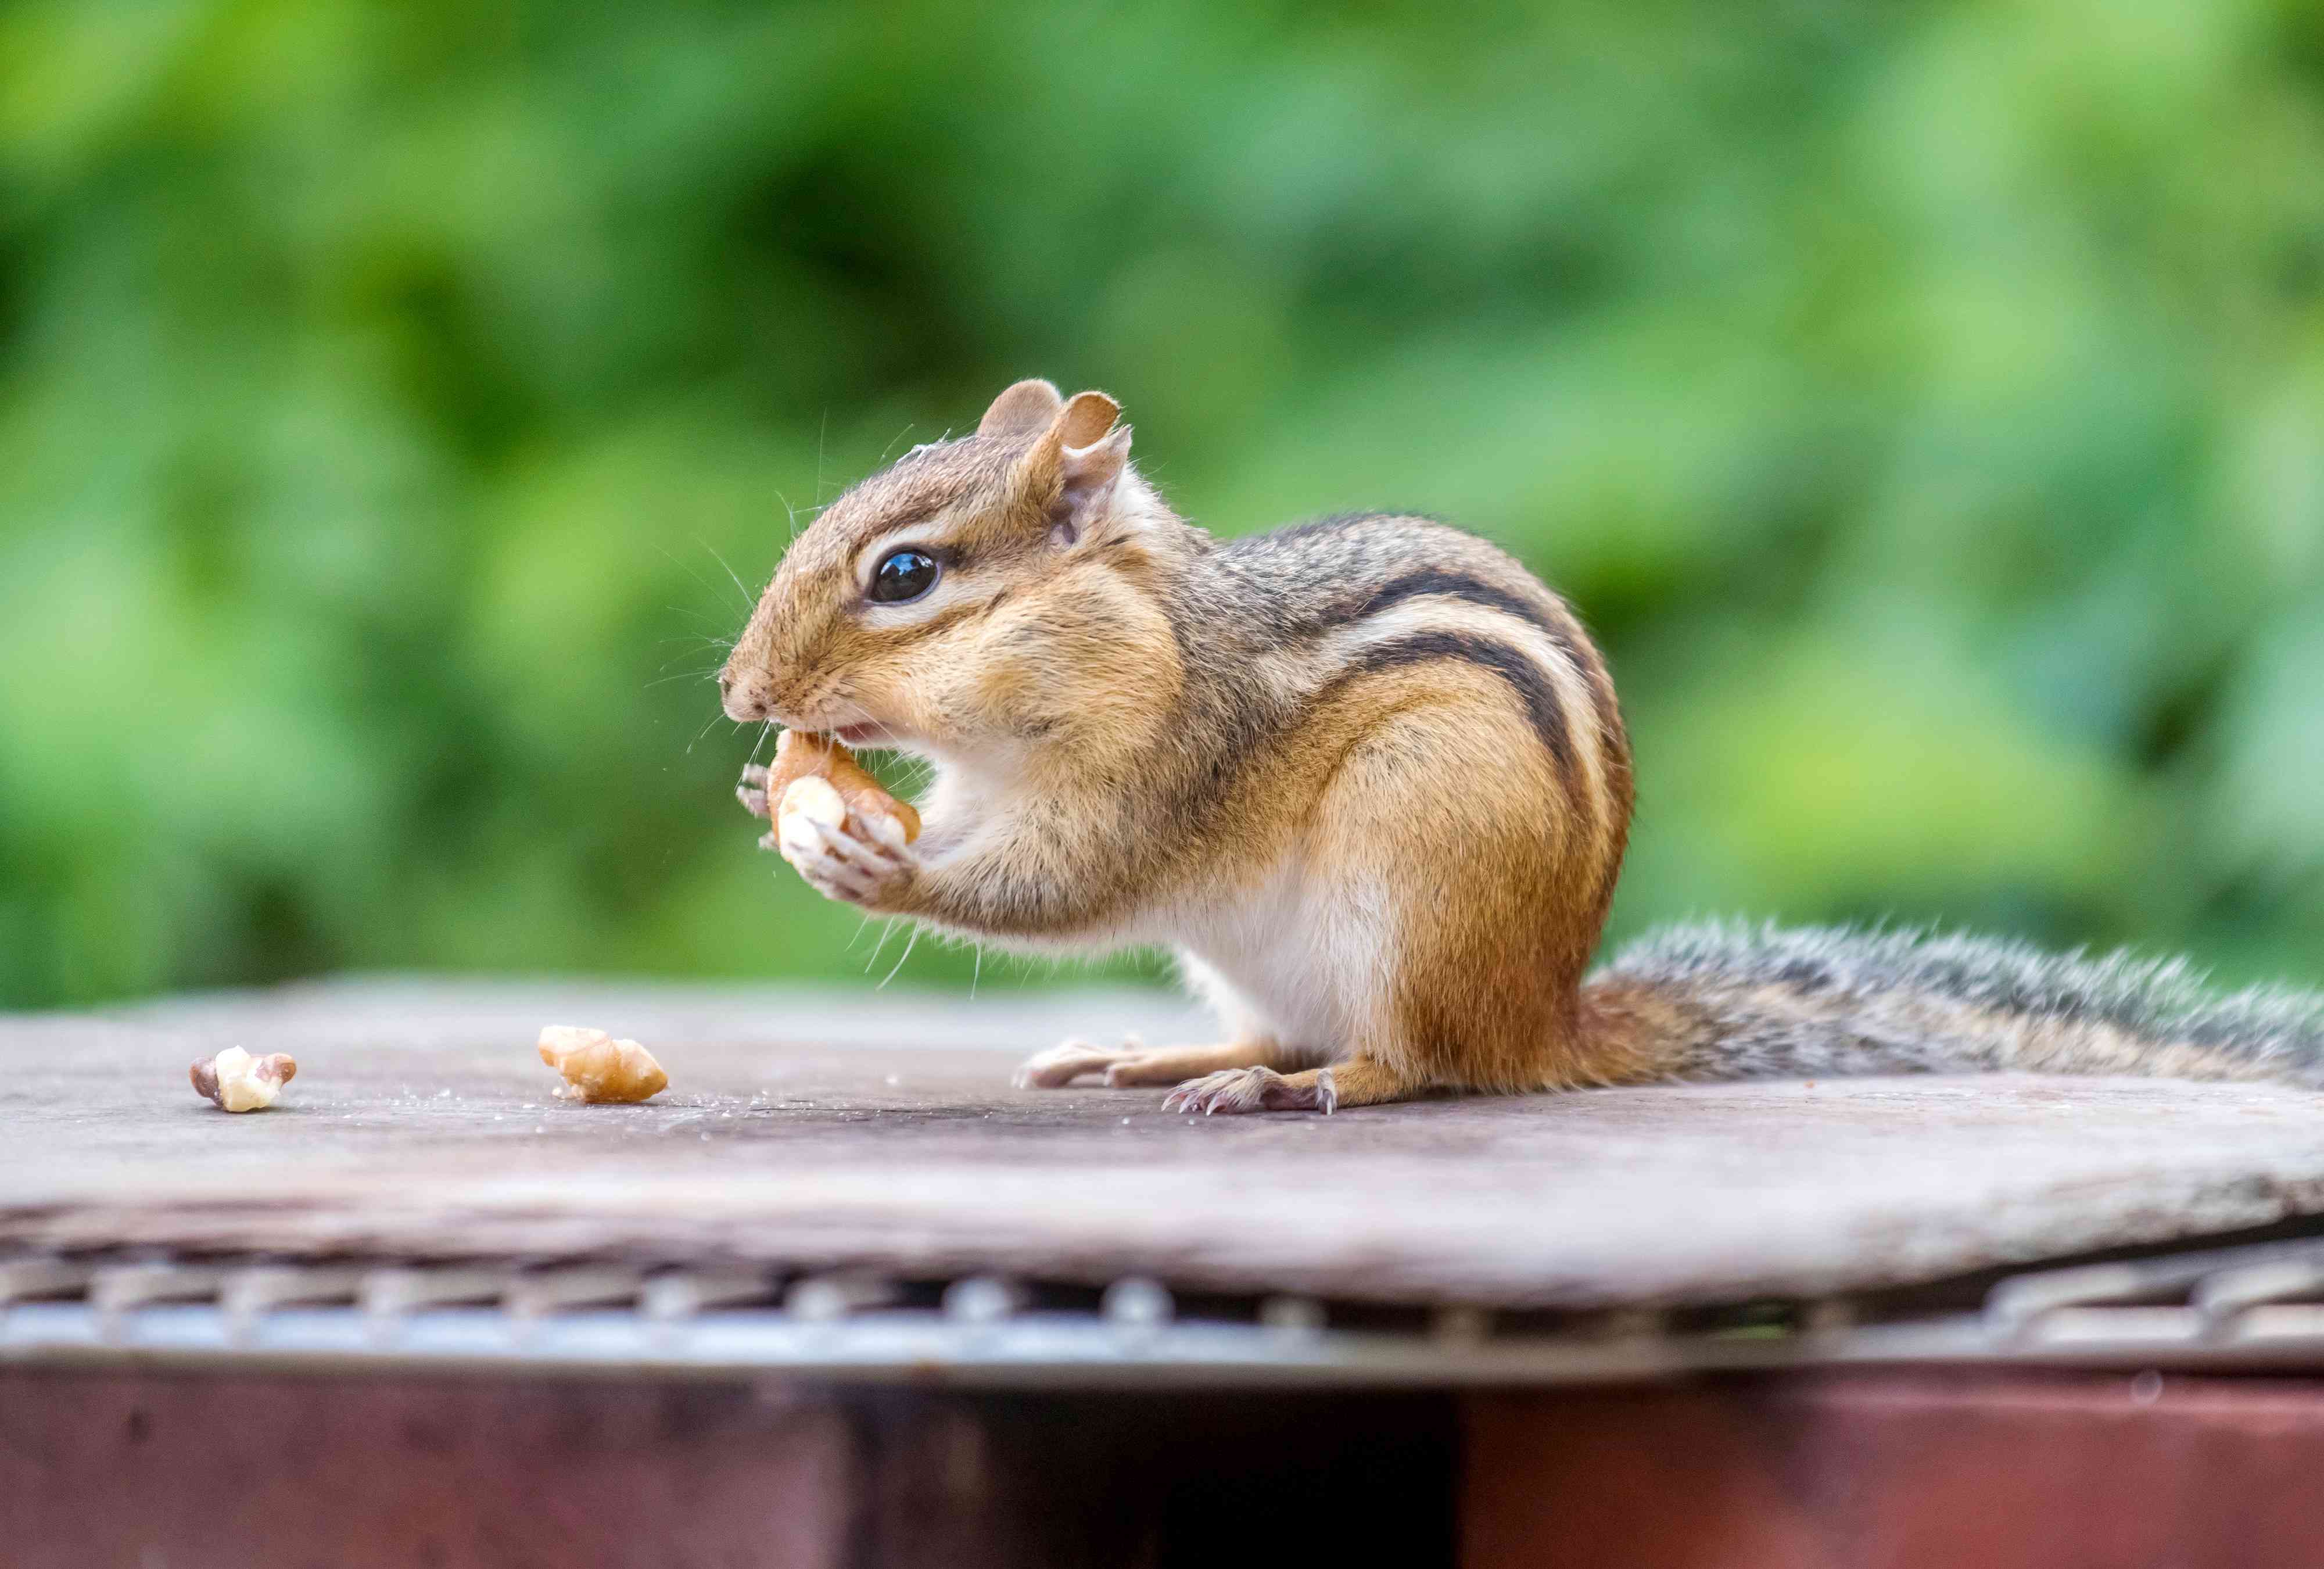 How to Get Rid of Chipmunks in Your Yard